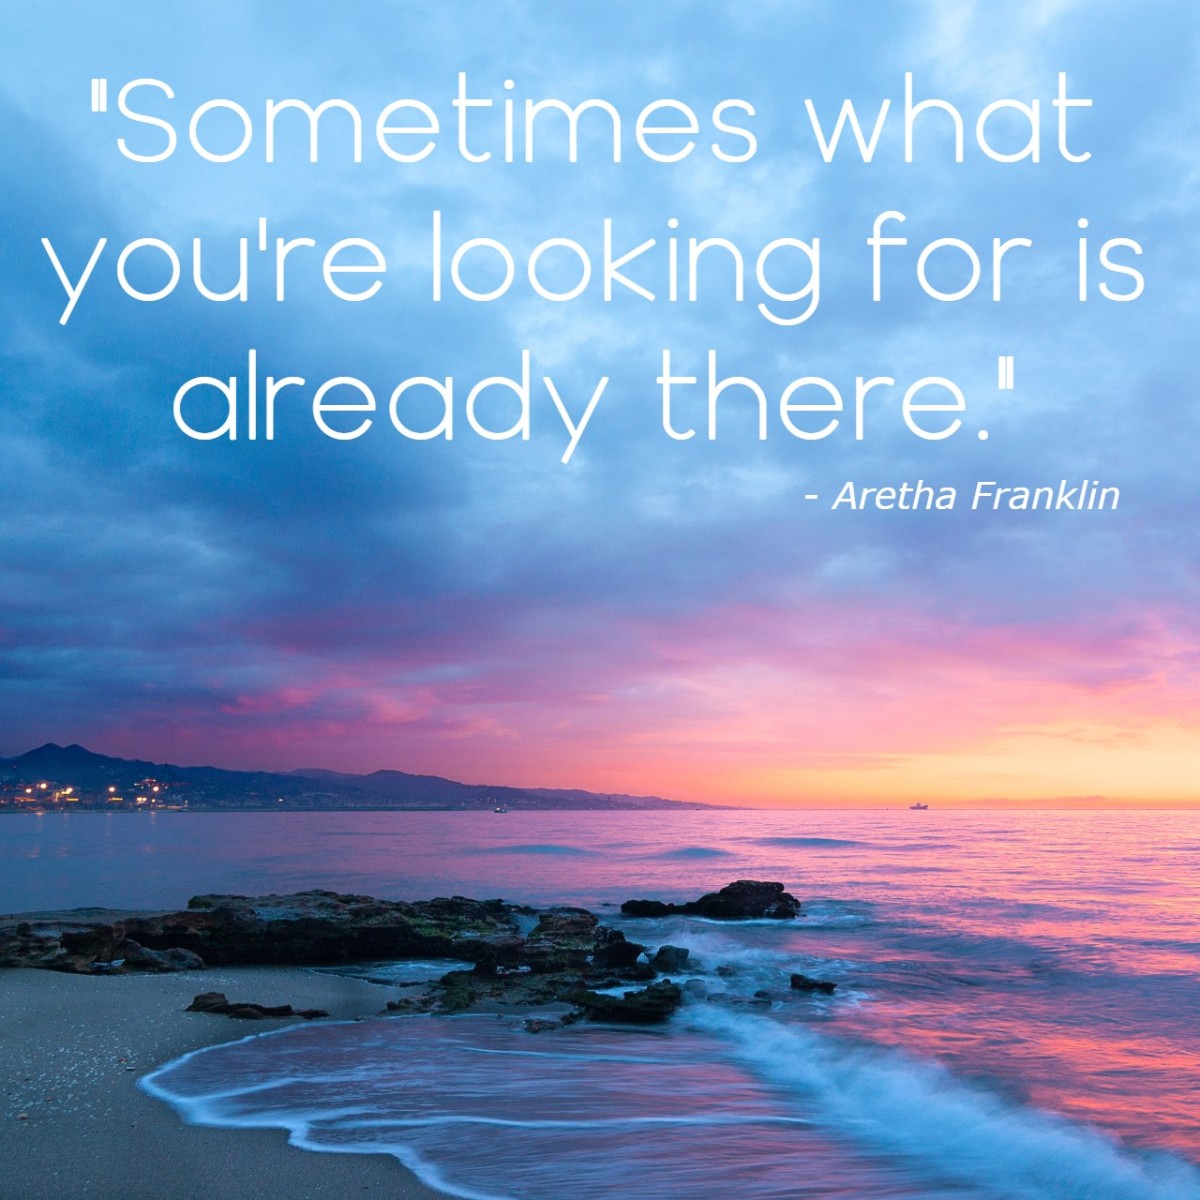 "Sometimes what you're looking for is already there." - Aretha Franklin, Queen of Soul